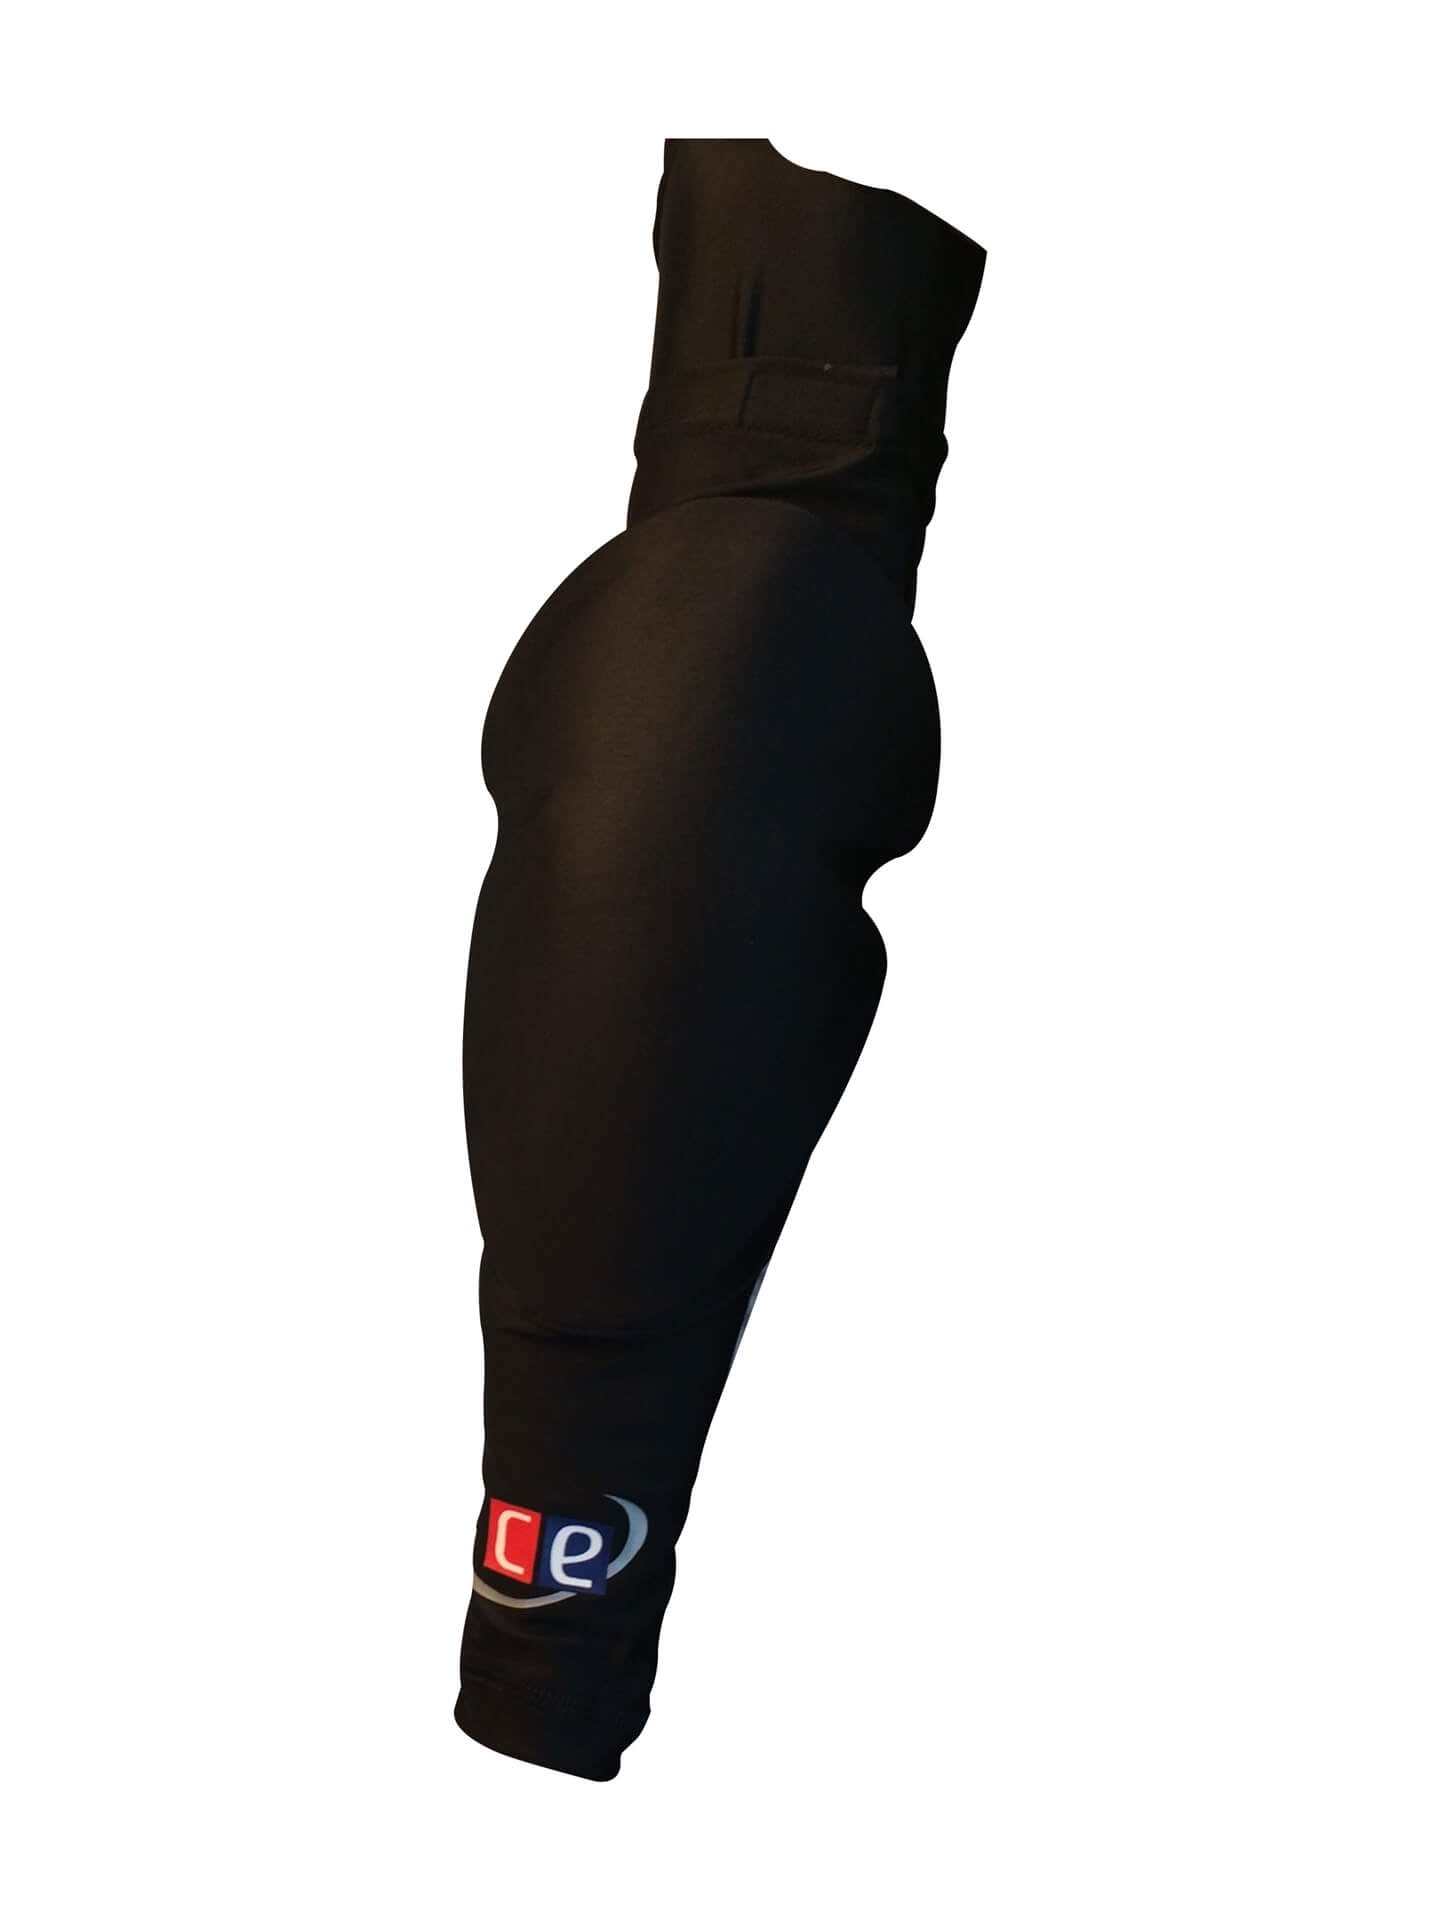 Elbow Arm Protection - High Density Foam Protection Compression Sleeves Black